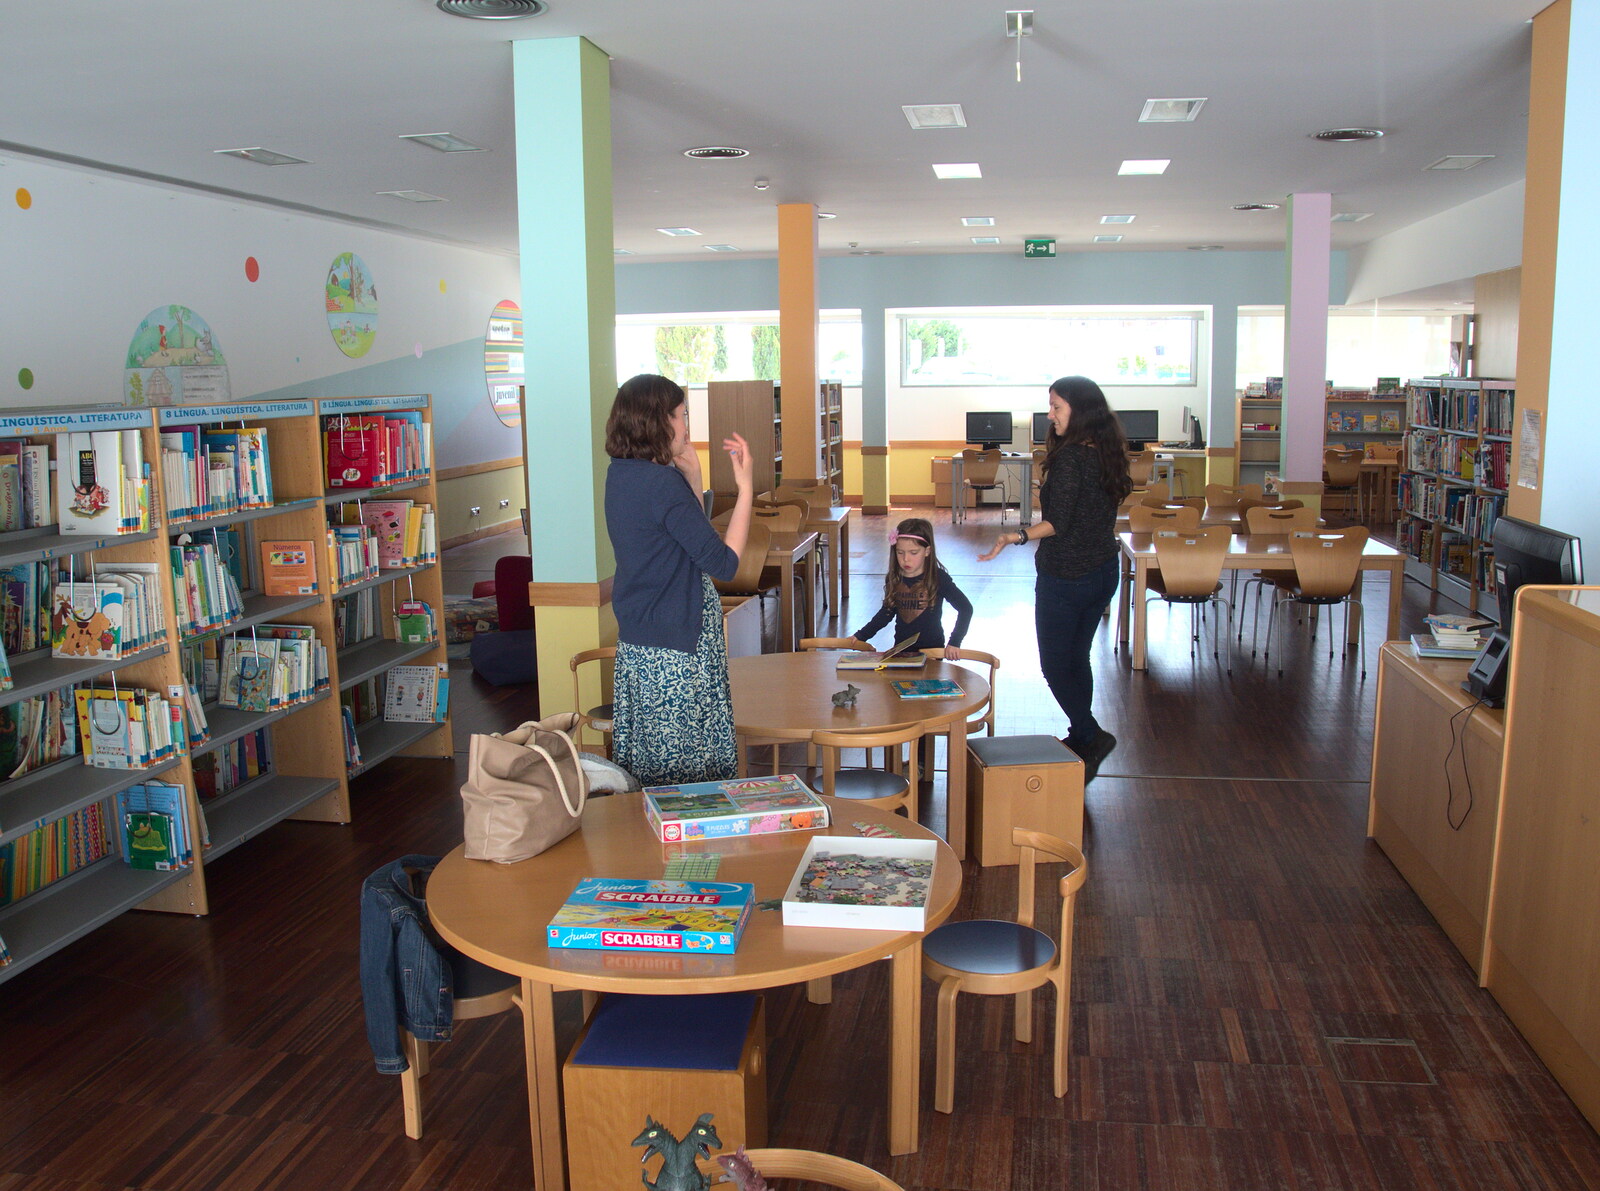 In the library from A Trip to Albufeira: The Hotel Paraiso, Portugal - 3rd April 2016